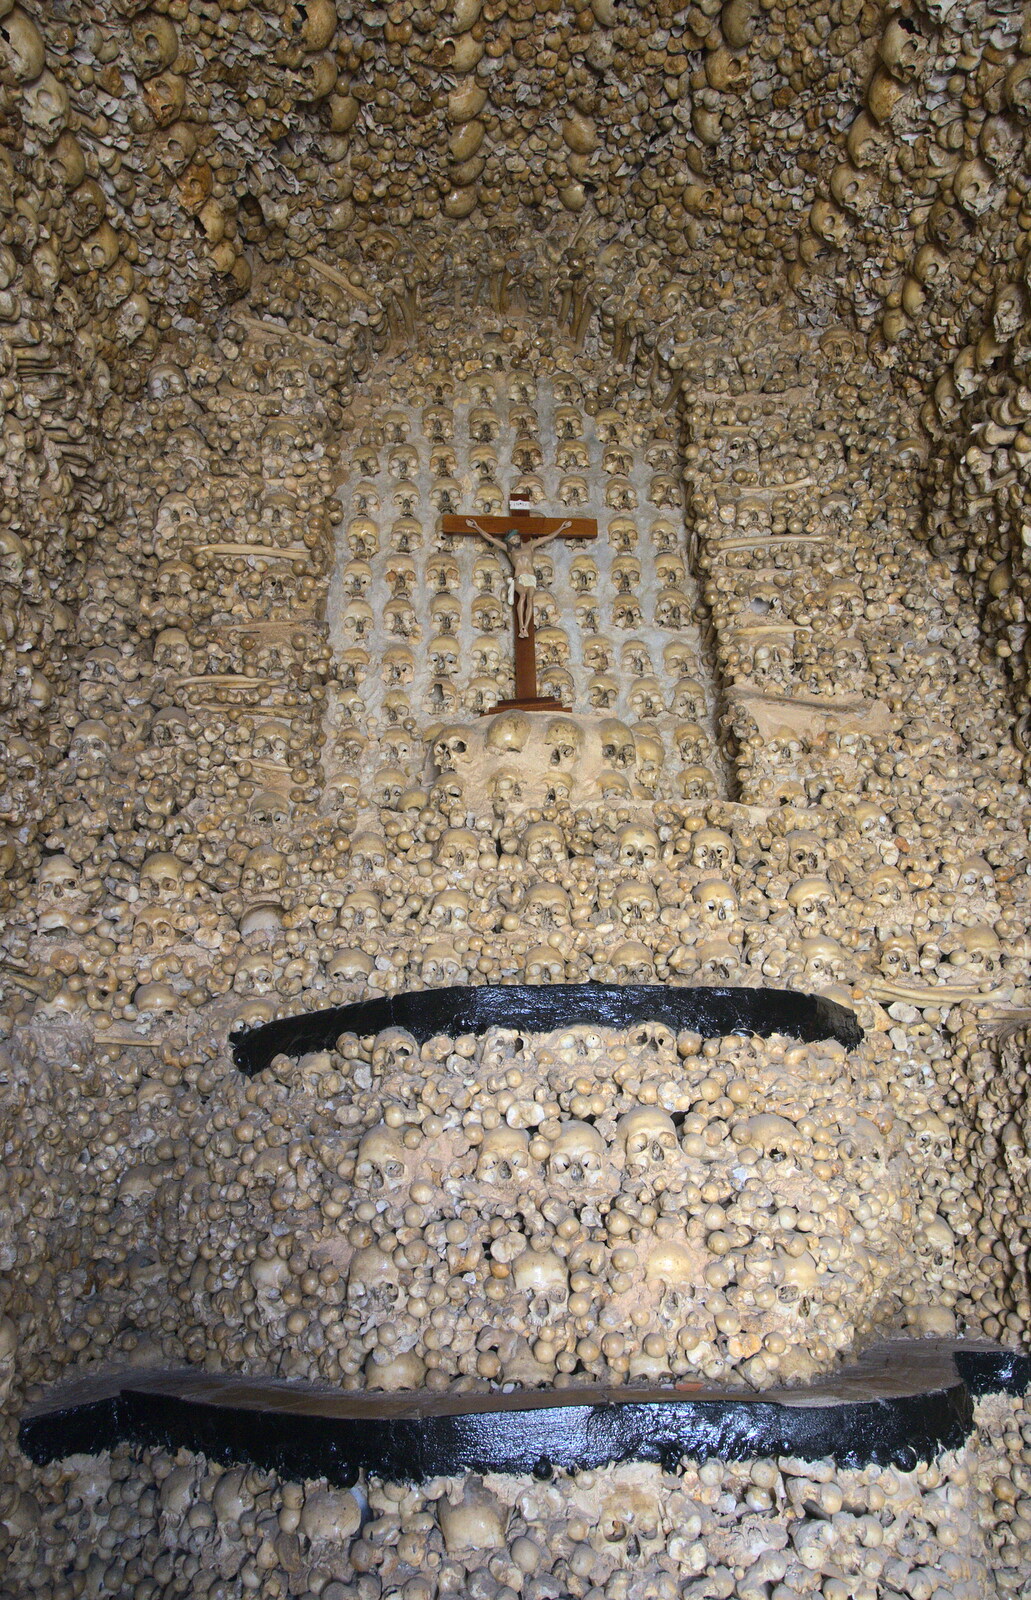 A crucifix surrounded by skulls from Gary and Vanessa's Barbeque, Alcantarilha, Algarve, Portugal - 7th April 2016